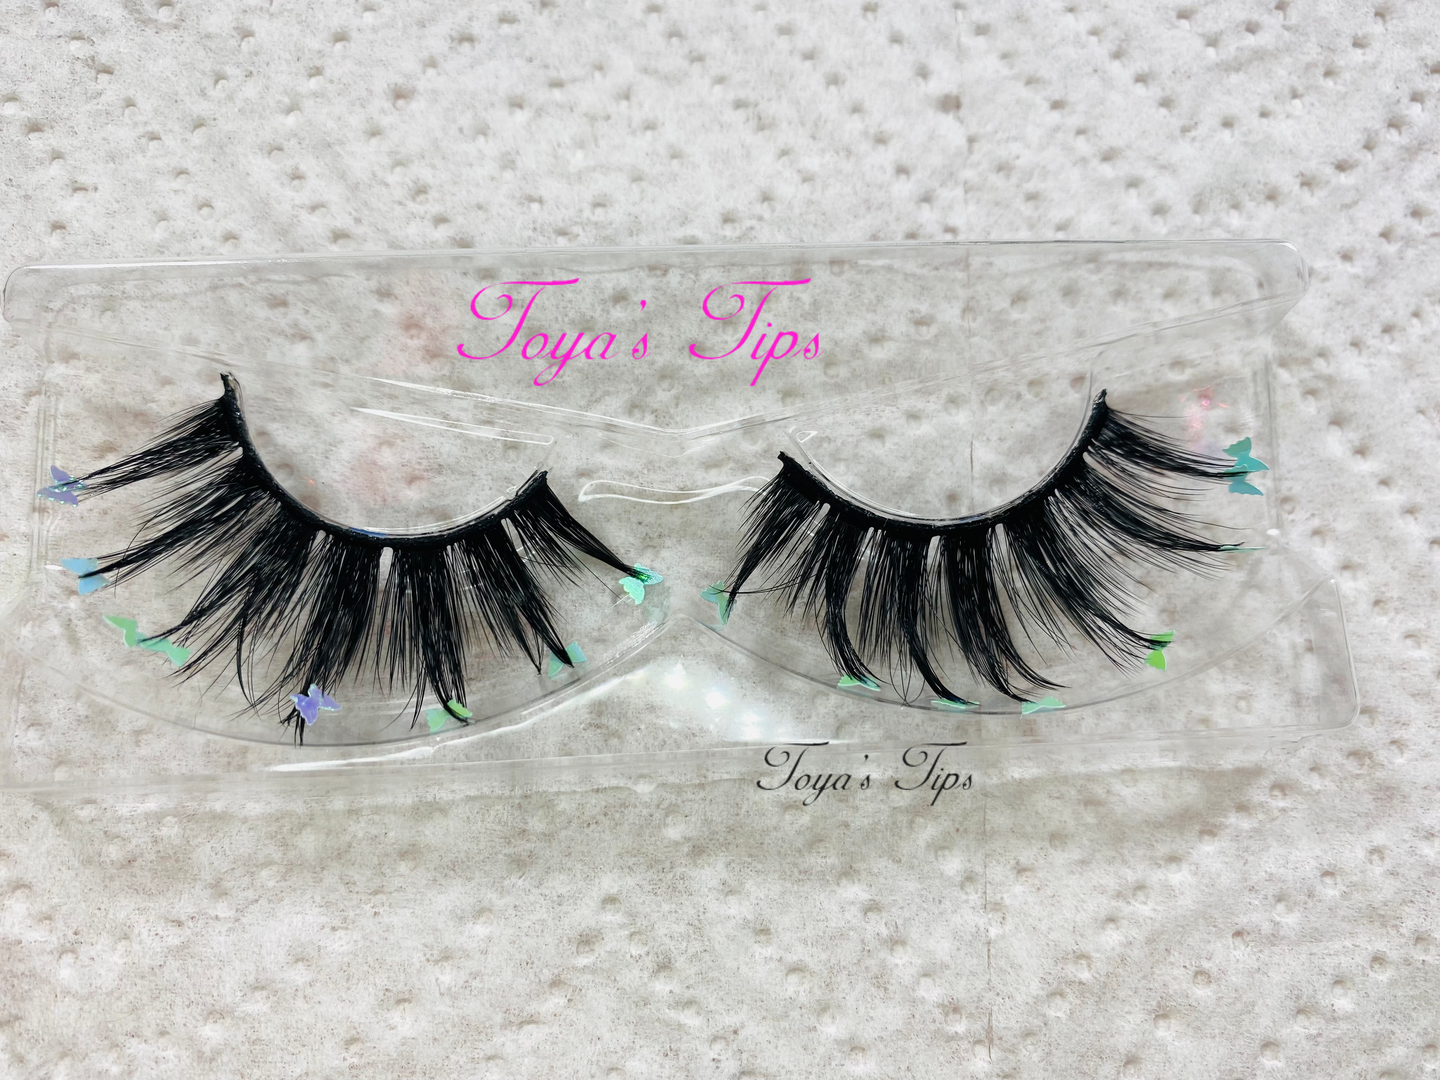 Butterfly Fly Lashes